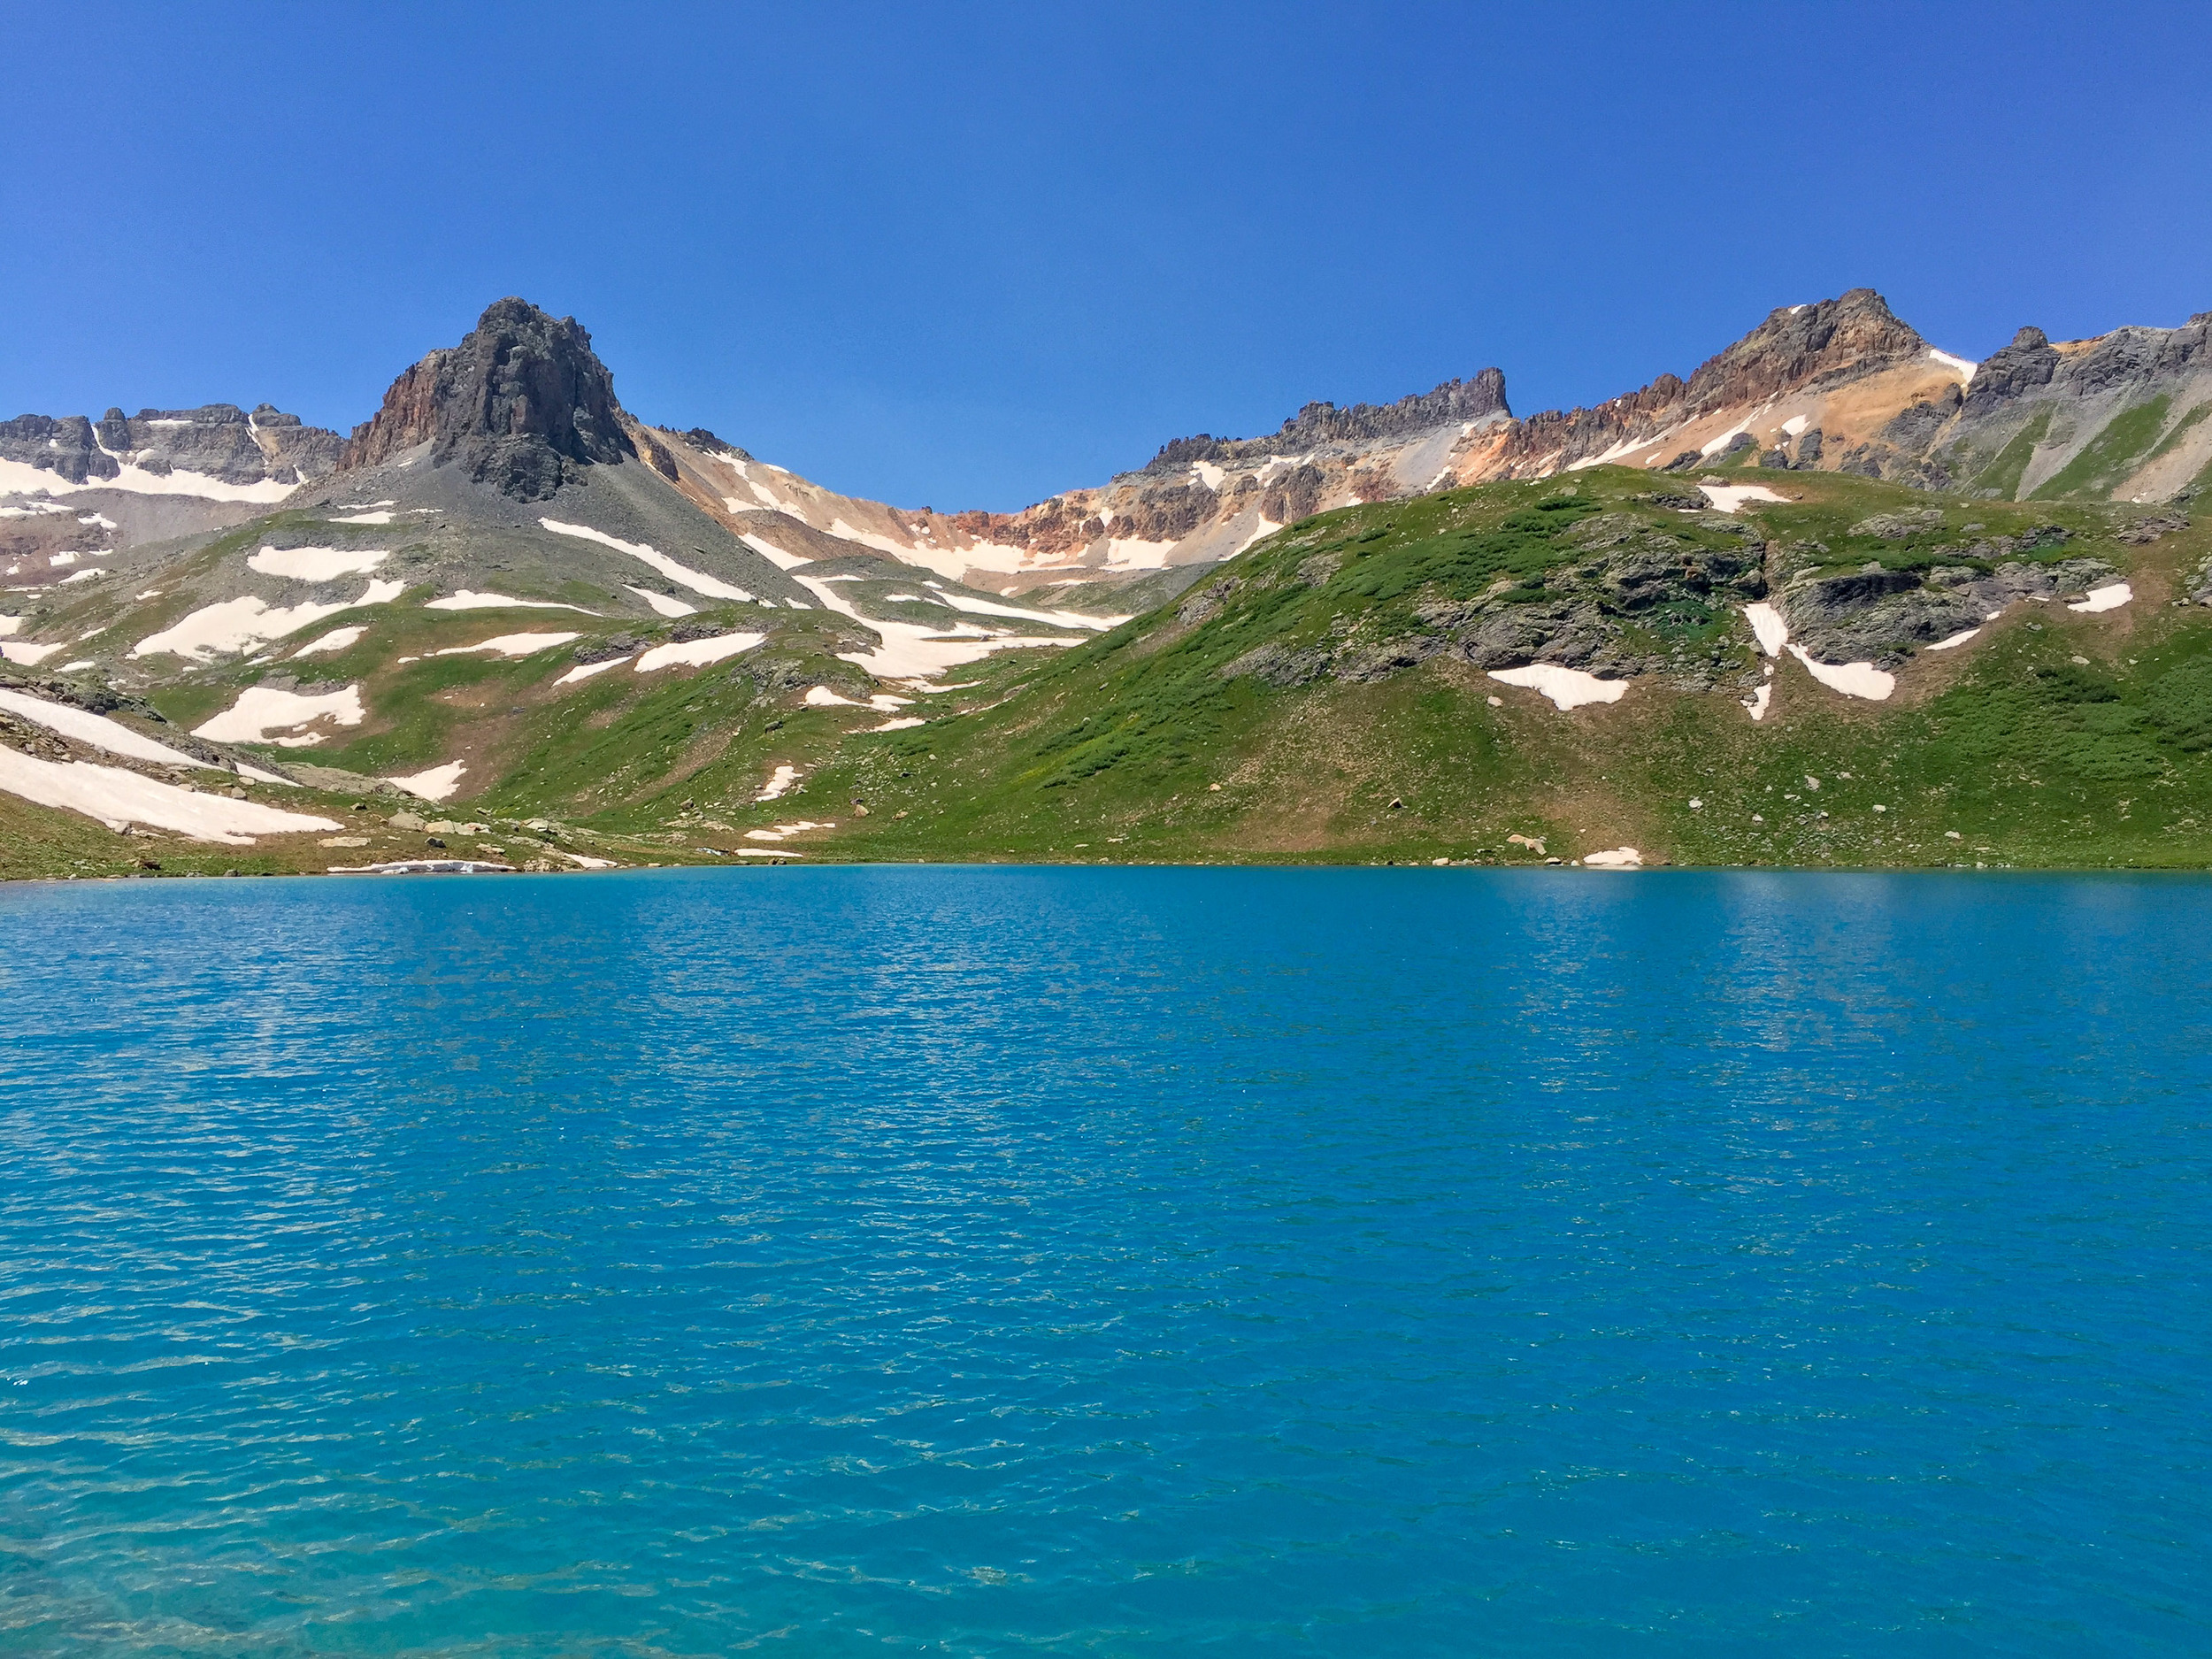 Too windy for reflections but the turquoise water of Ice Lake makes for a beautiful photo anytime